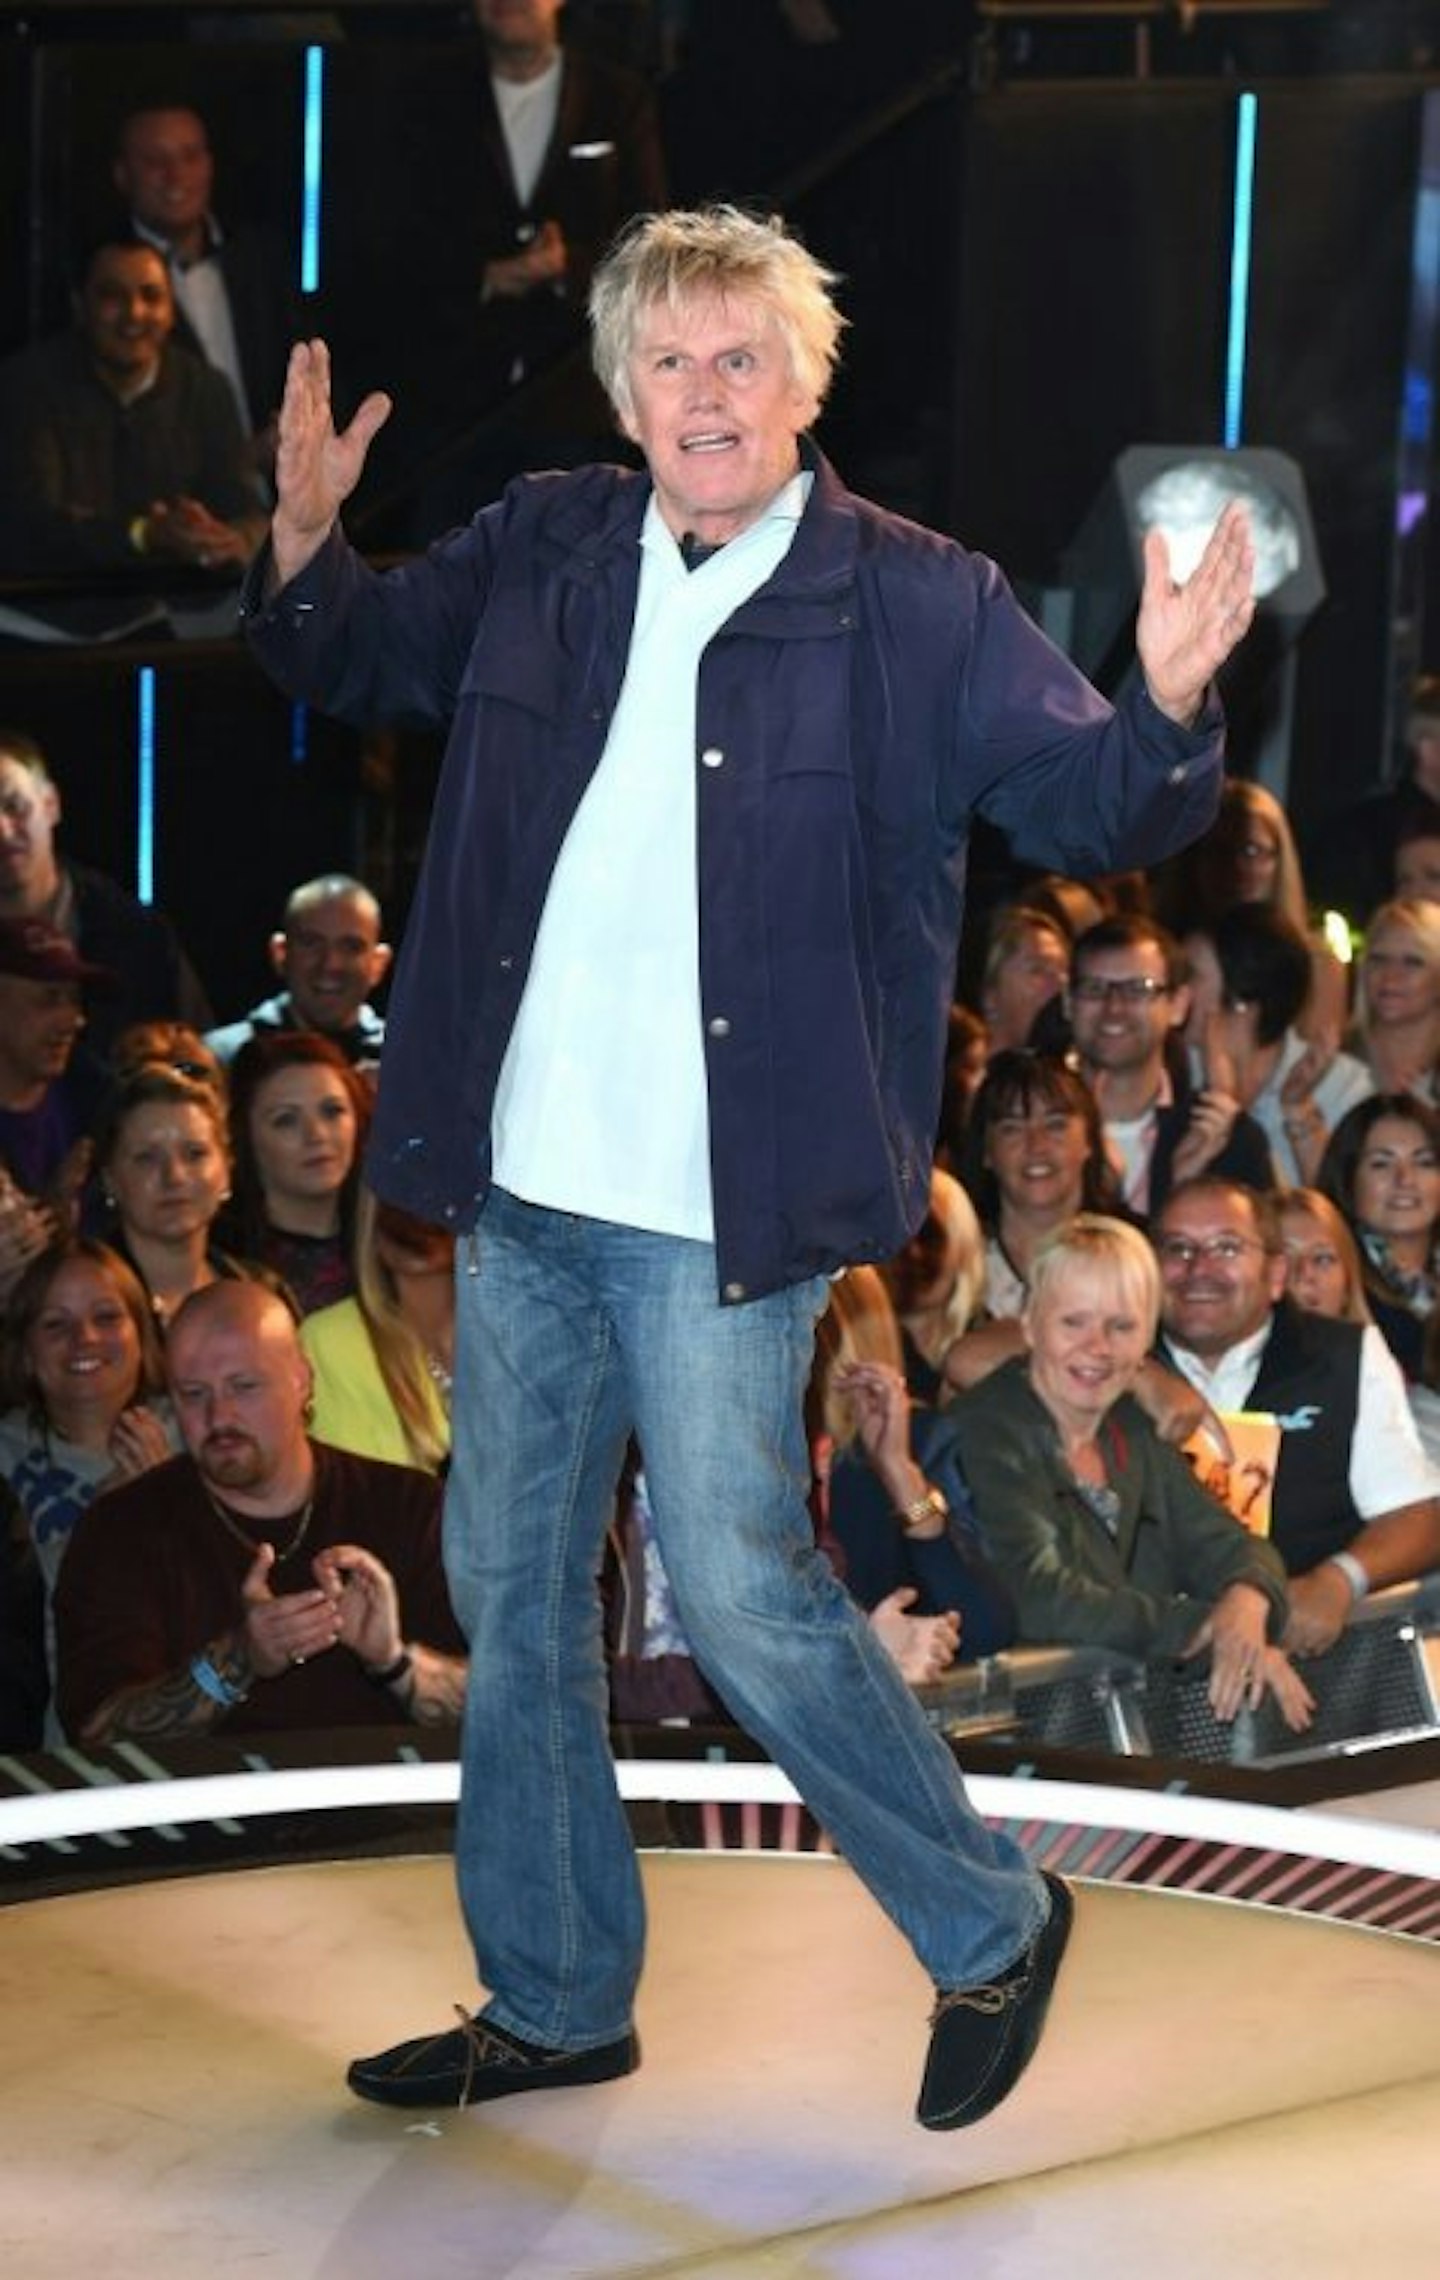 Gary Busey waving at the crowd